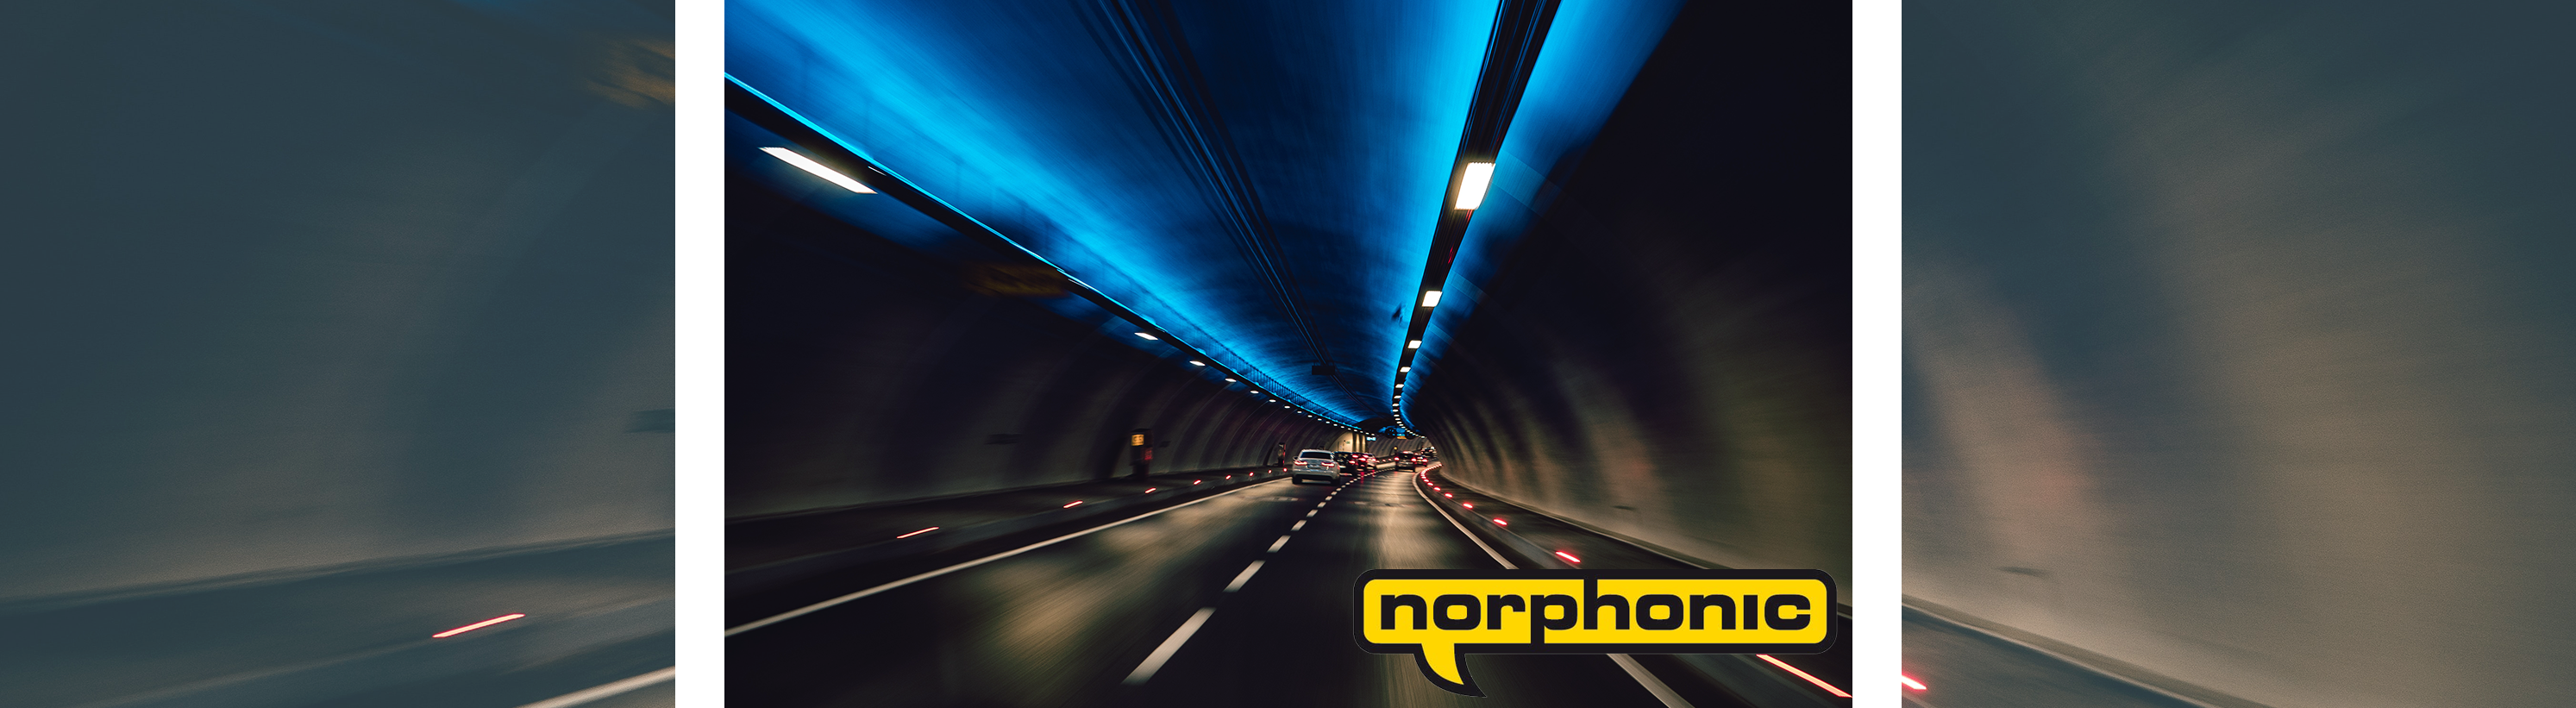 Kitron and Norphonic aim to help tunnel evacuation with Evacsound